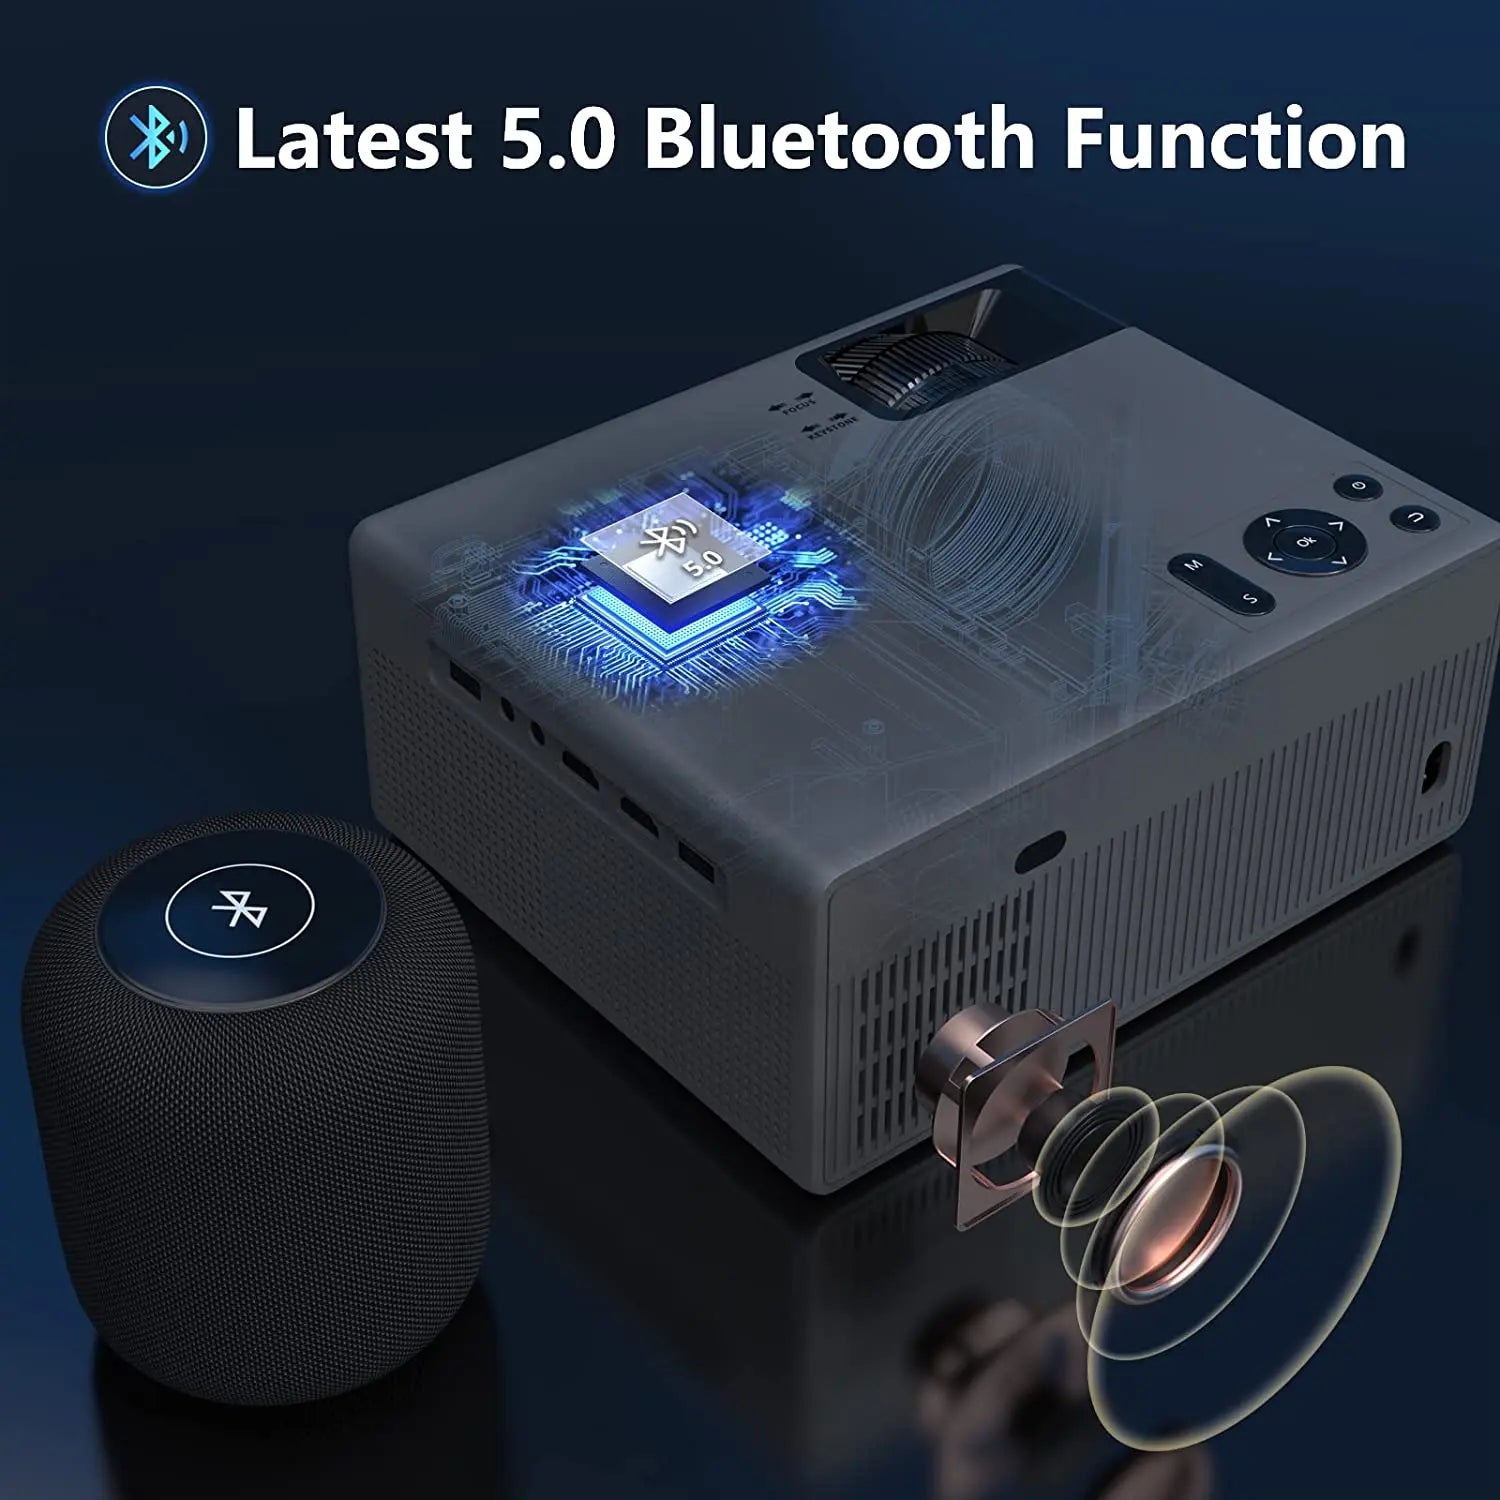 FUDONI Portable Movie Projector with WiFi and Bluetooth,5G WiFi Native